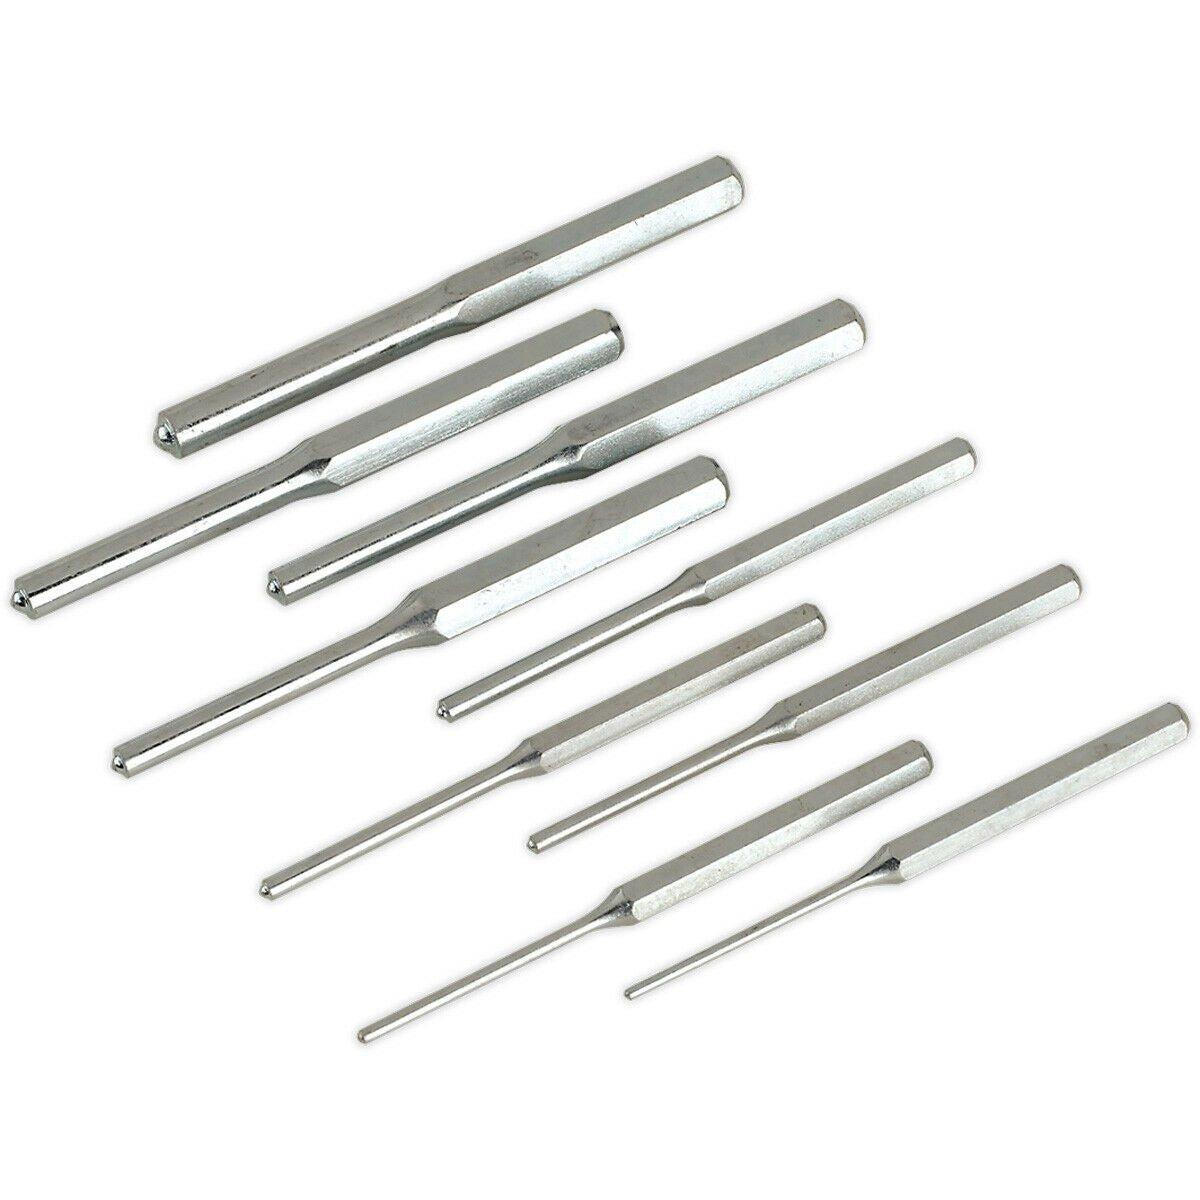 9 Pc Parallel Roll Pin Punch Set - Hardened & Tempered Steel Punches - Imperial